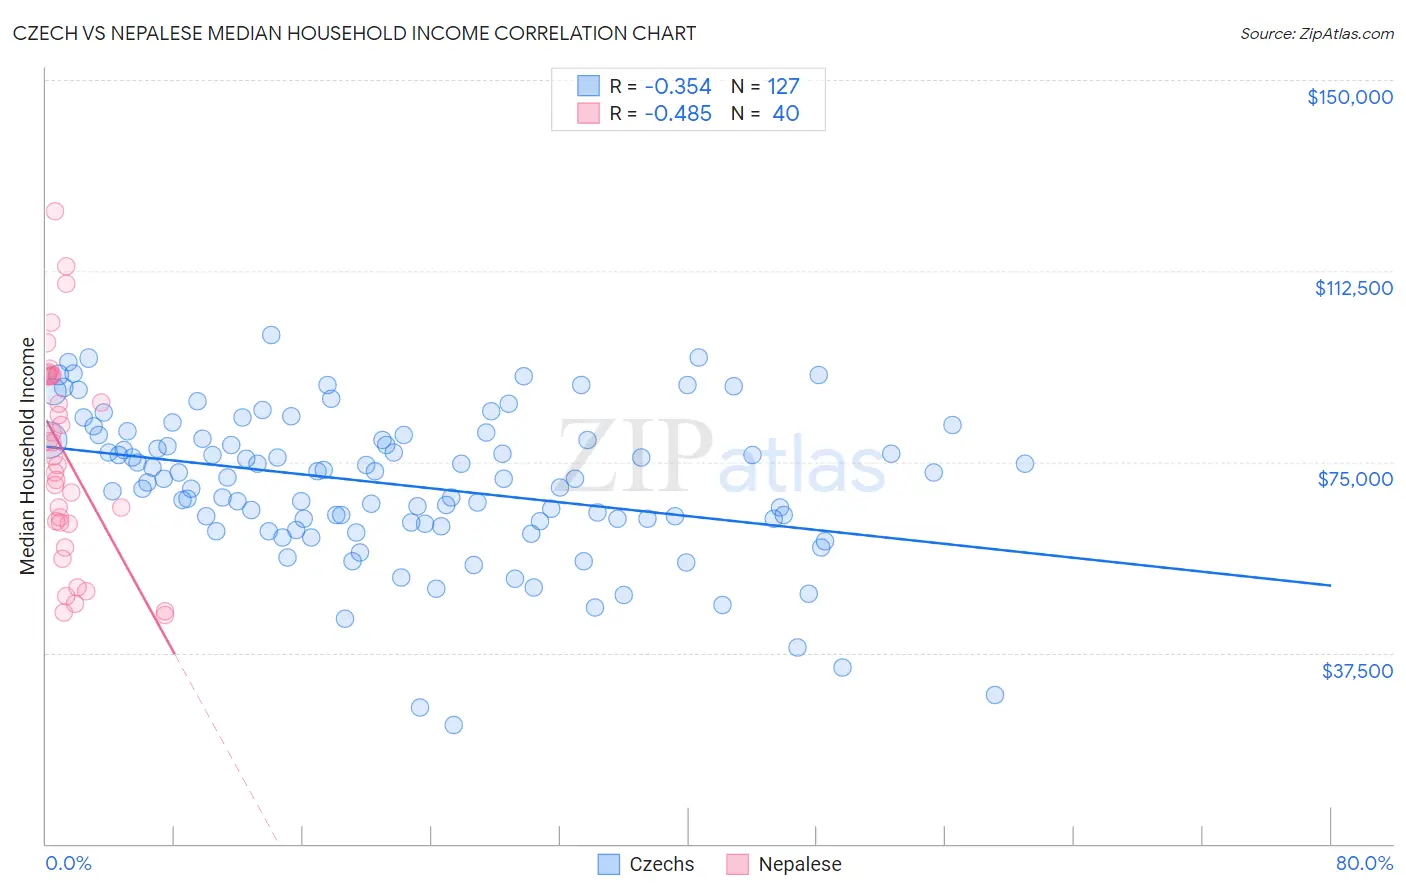 Czech vs Nepalese Median Household Income